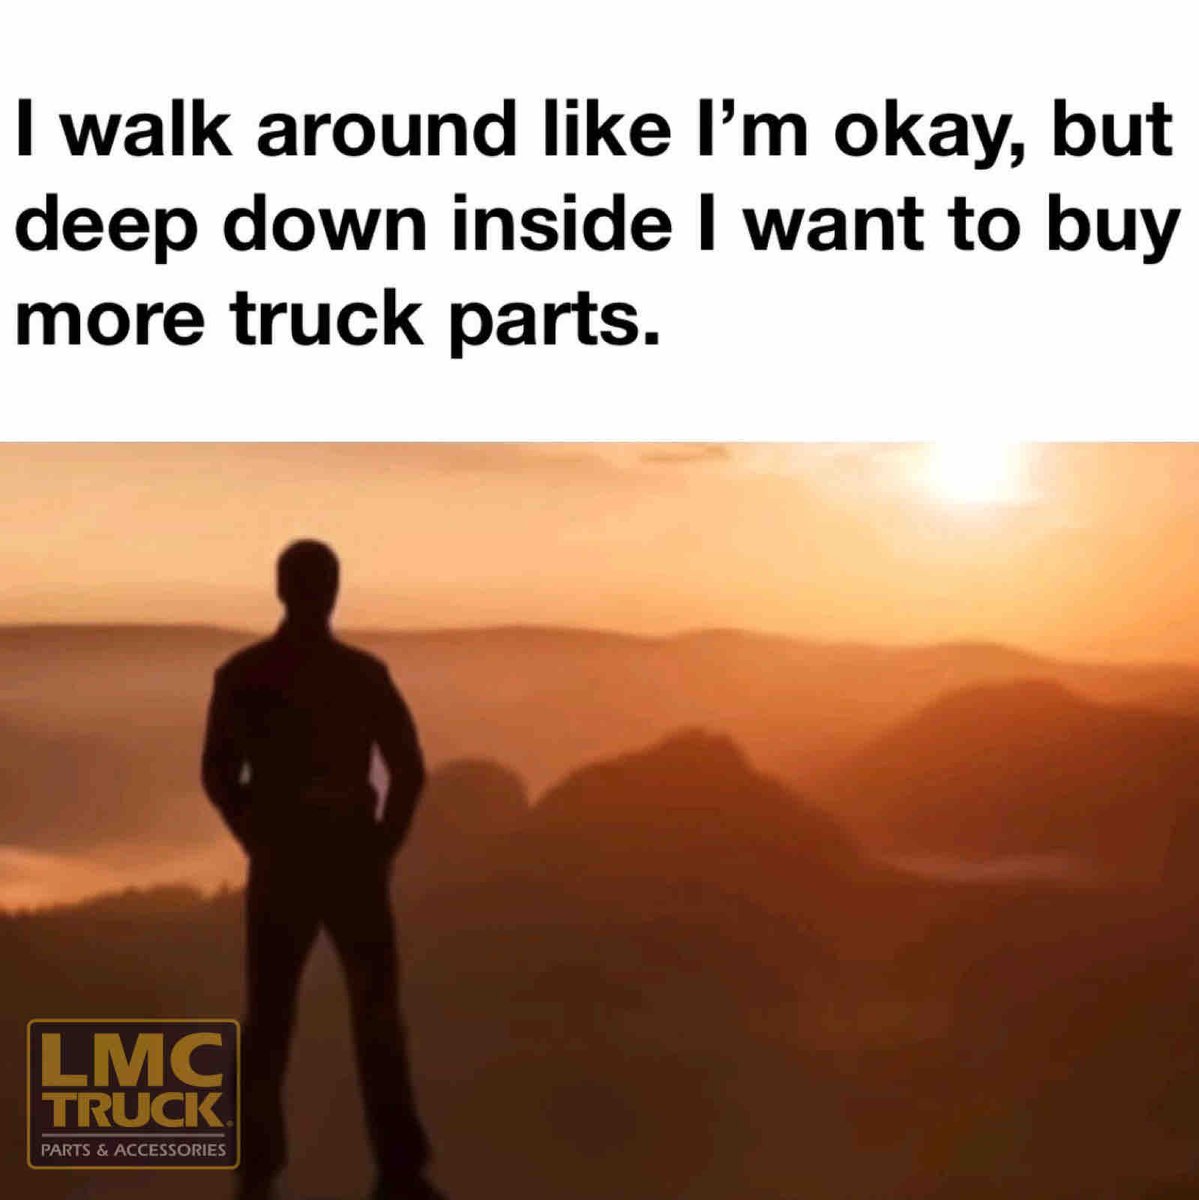 Stay strong!

#KeepEmOnTheRoad #LMC #LMCTruck #LMCTruckParts #LMCTruckLife #rust #patina #project #projecttrucks #customtrucks #classictrucks #classictruck #oldtruck #oldtrucks #truck #trucks #trucksdaily #truckdaily #trucknation